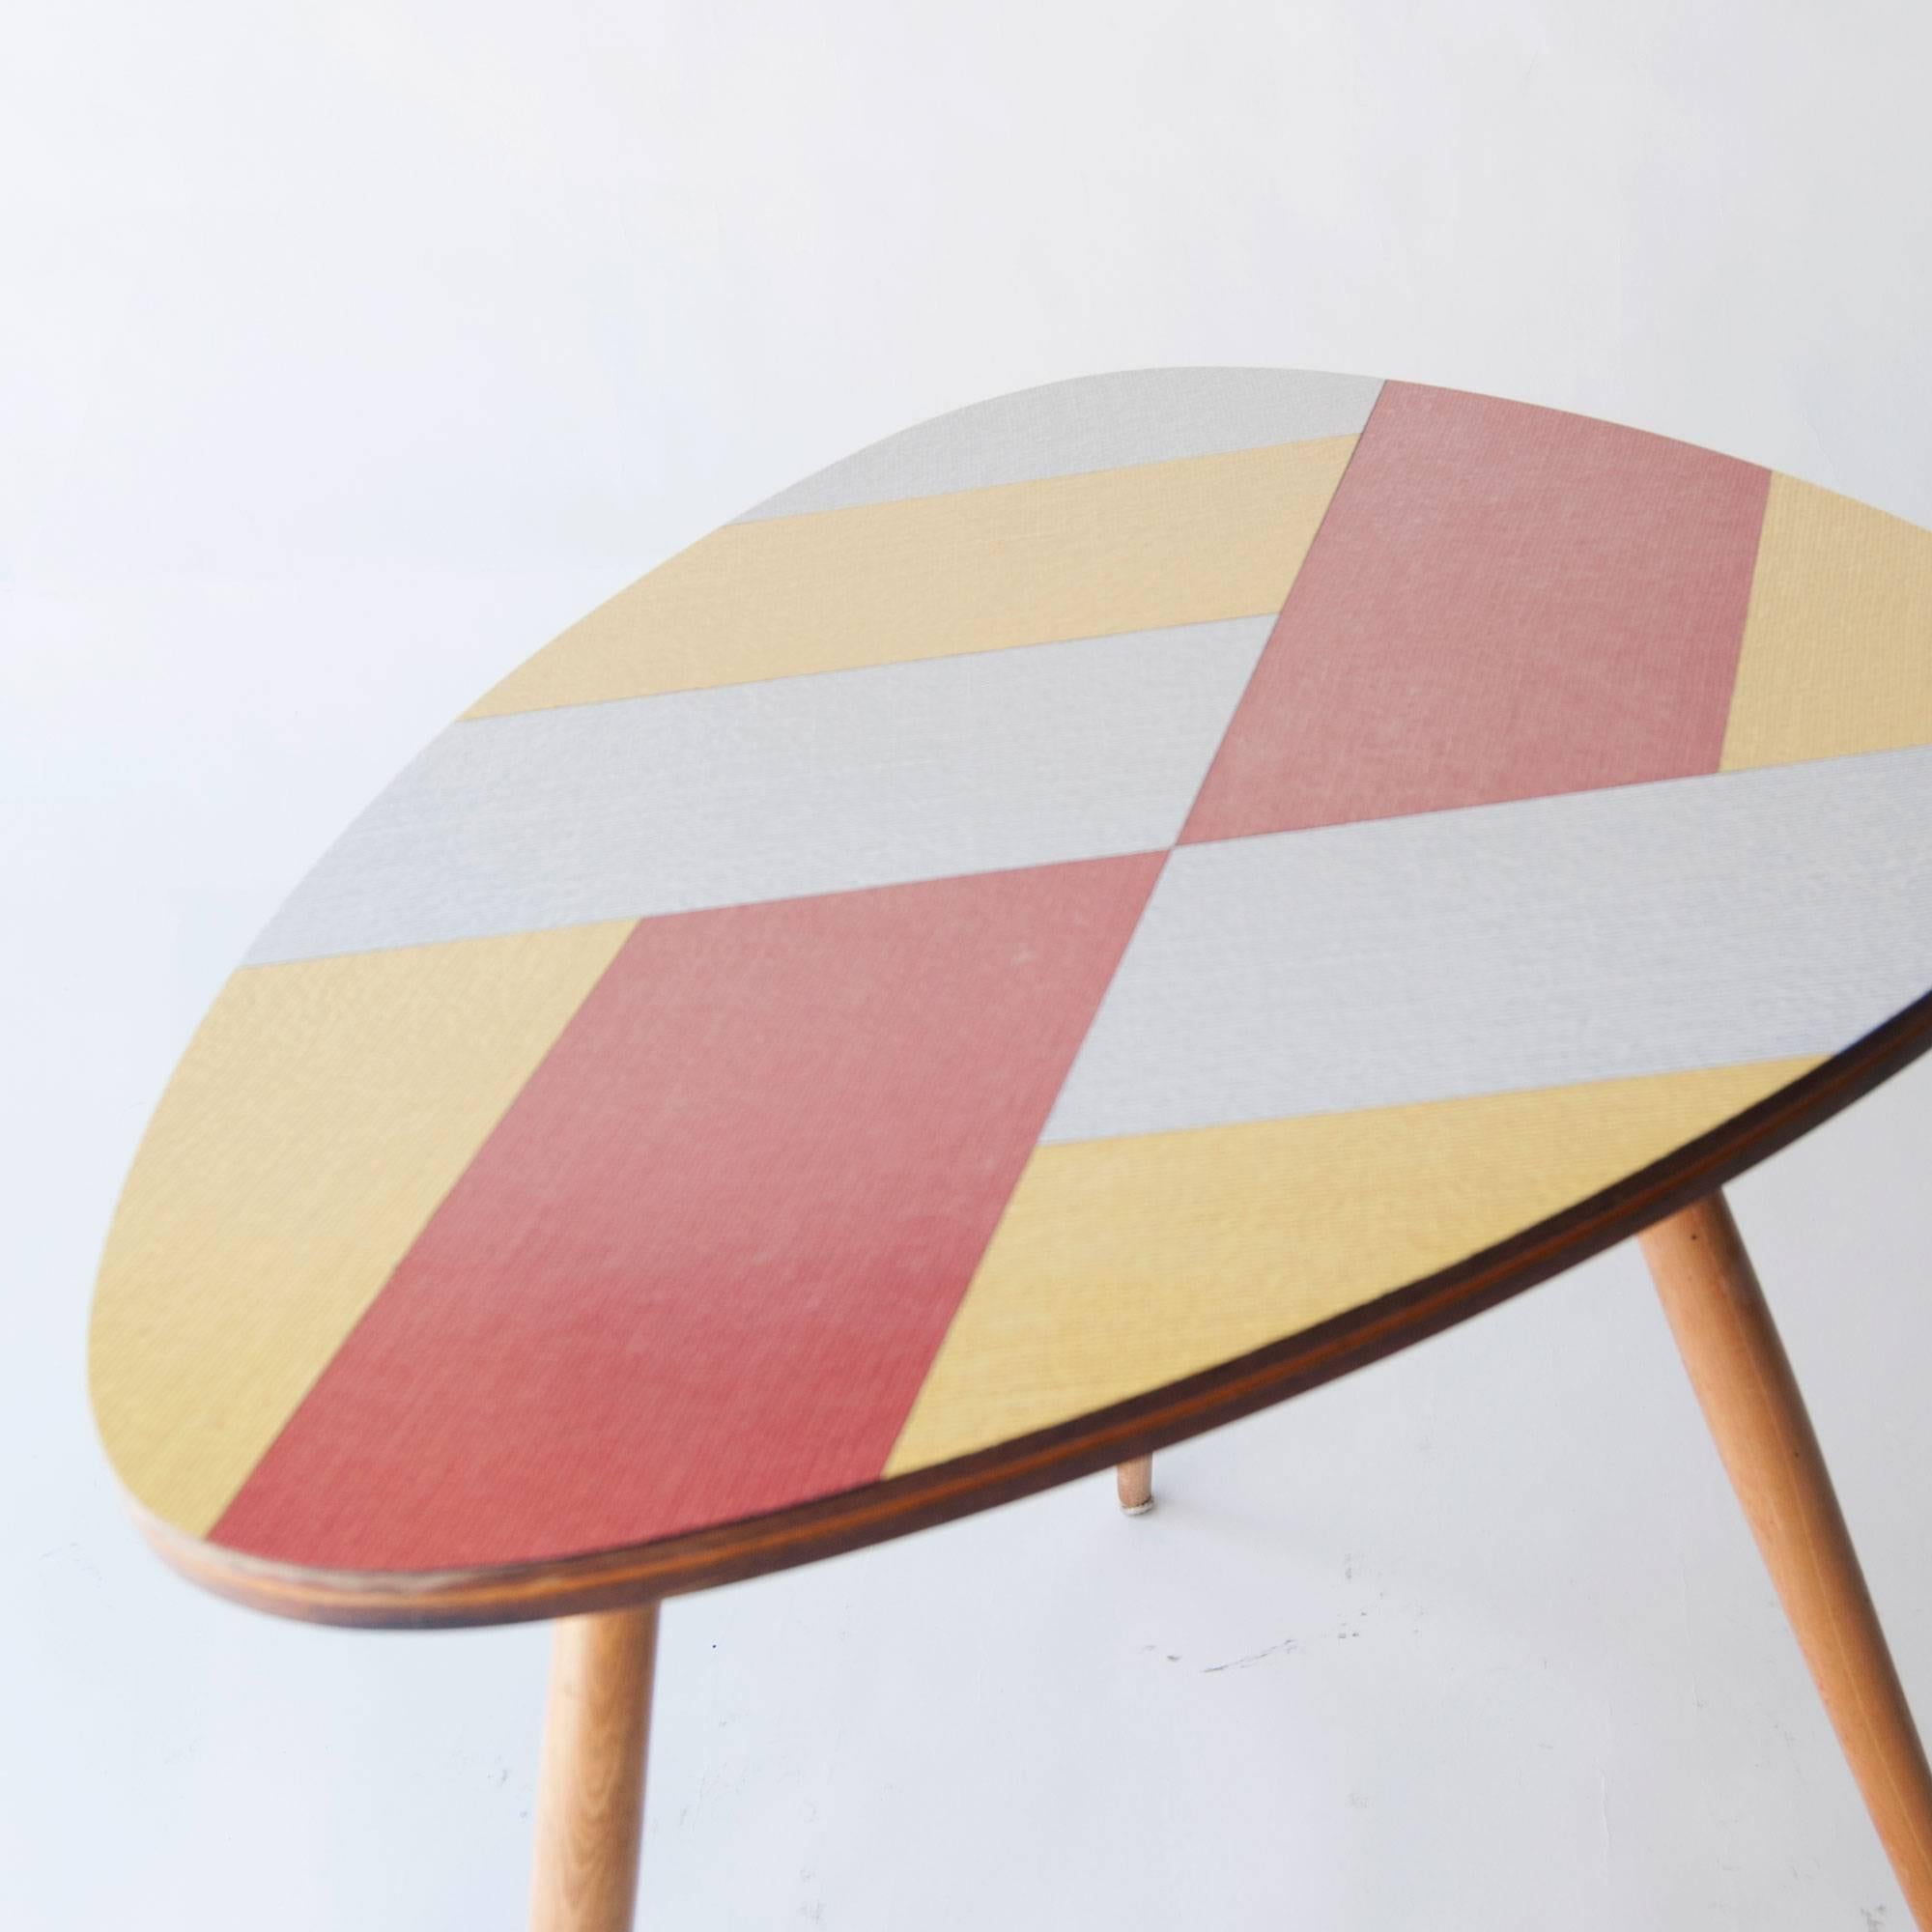 Pair of oak structure tables with conic legs and top made in formica decorated with a geometric design in different colors.